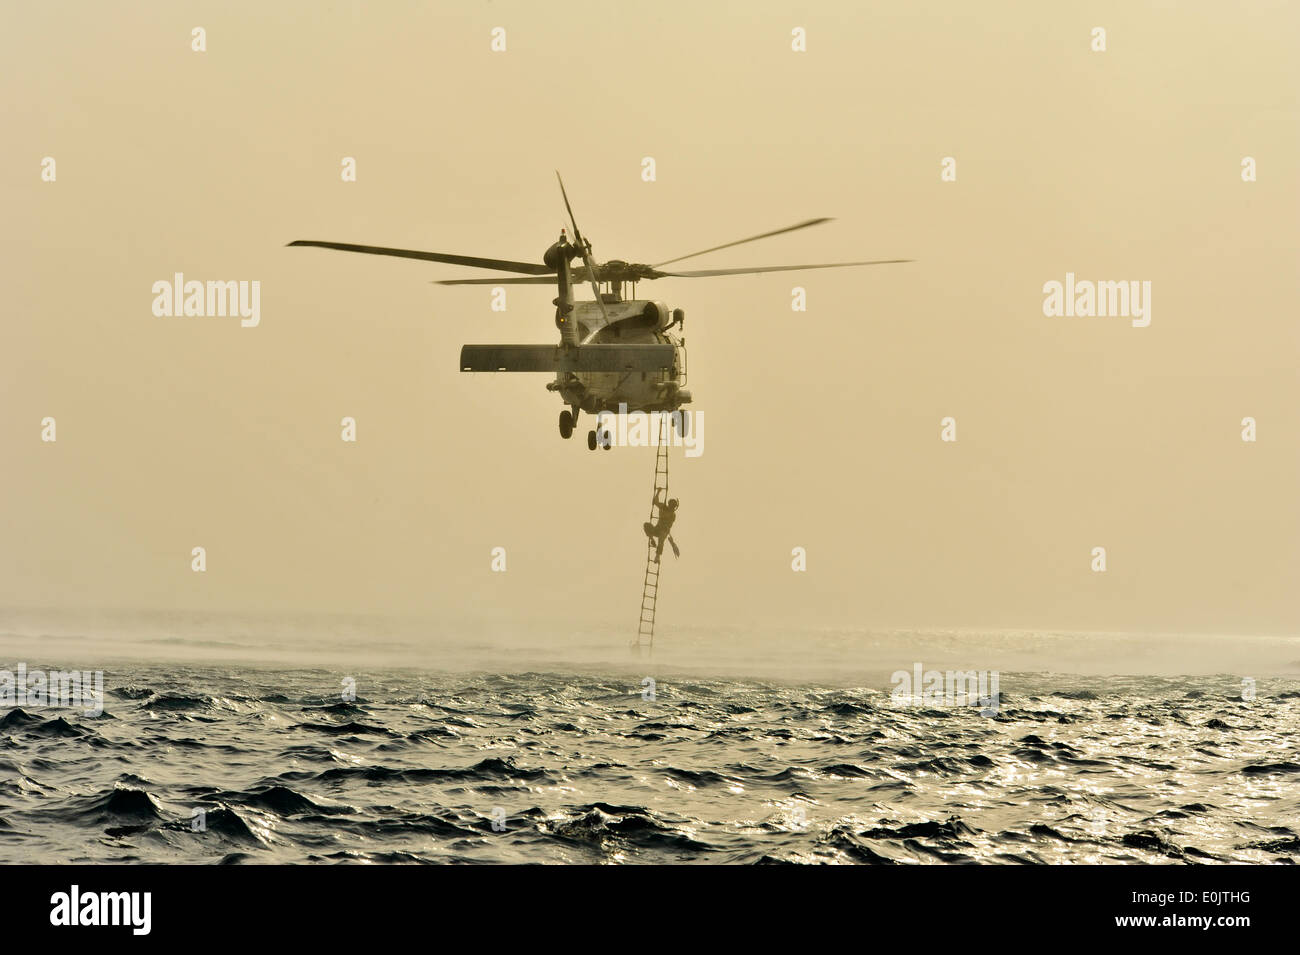 U.S. Air Force pararescue personnel from the 82nd Expeditionary Rescue Squadron, climb a rope ladder to board an SH-60 Sea Hawk Stock Photo